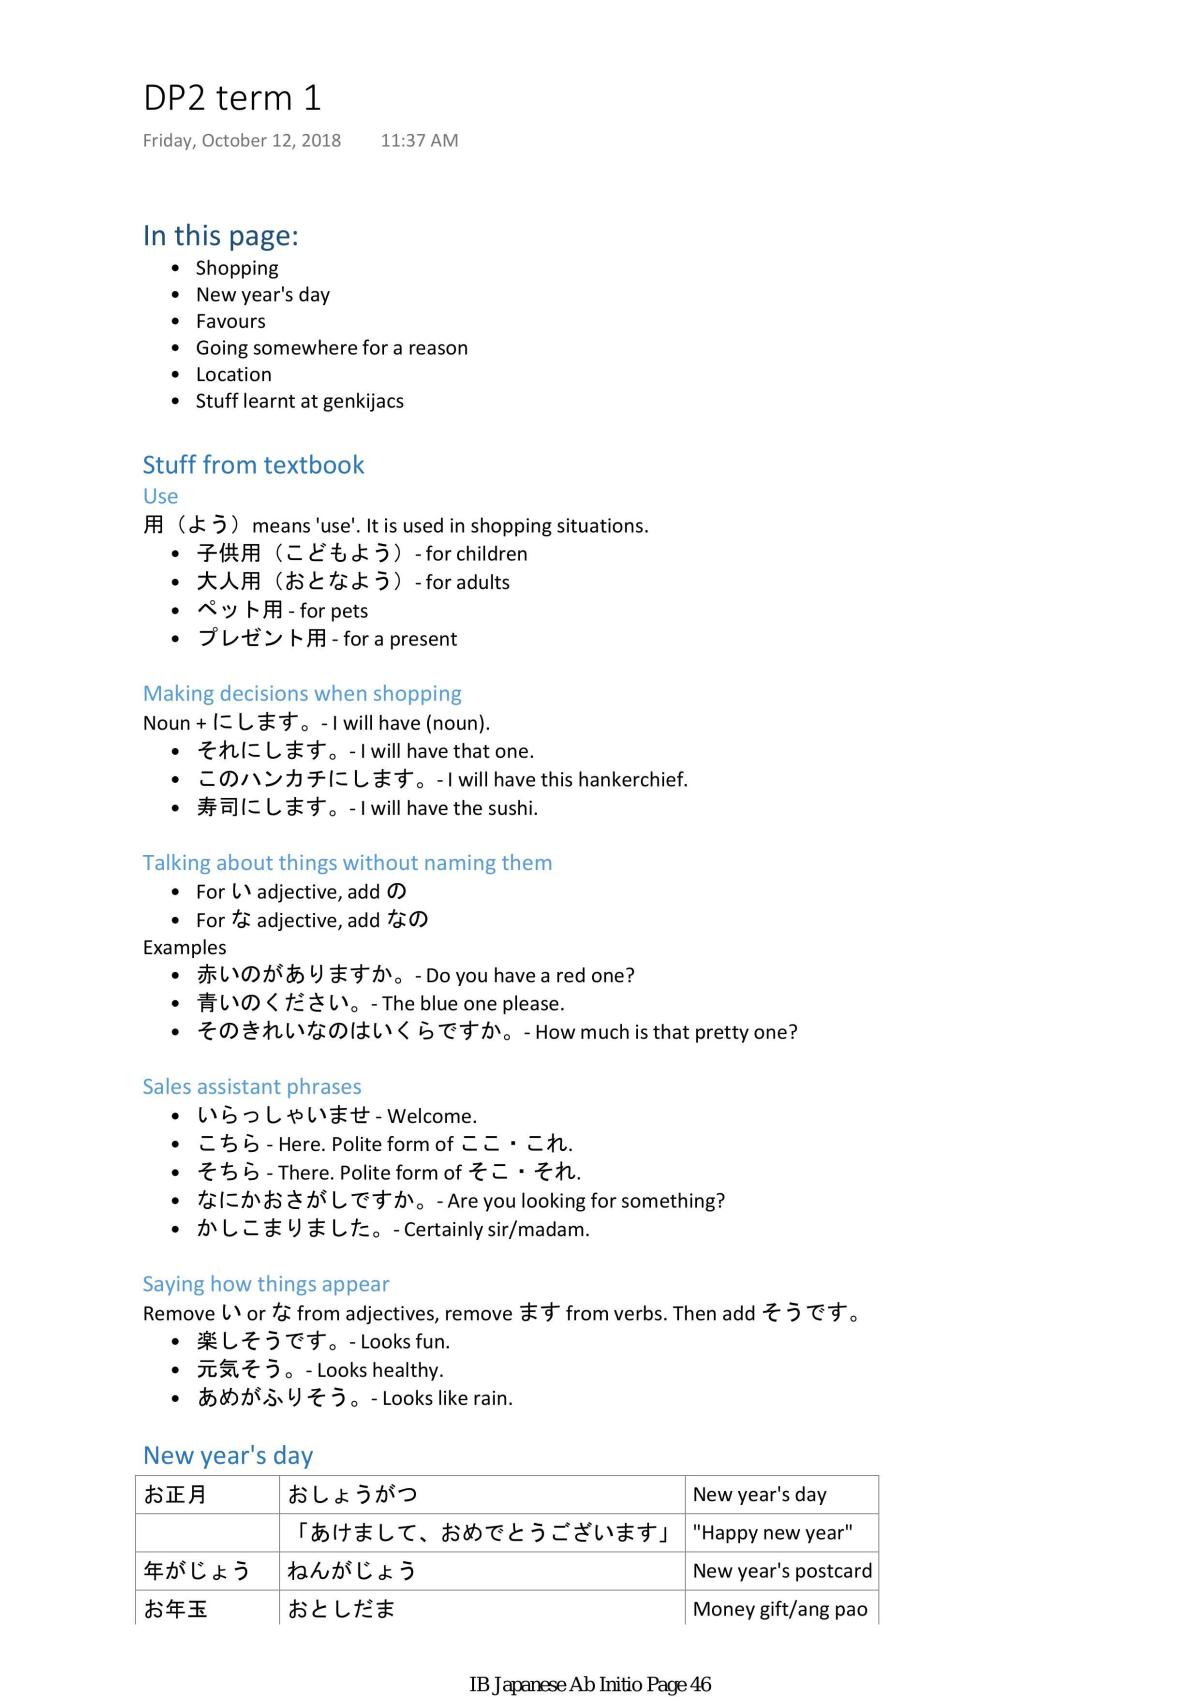 IB Japanese Ab Initio Notes - Page 46